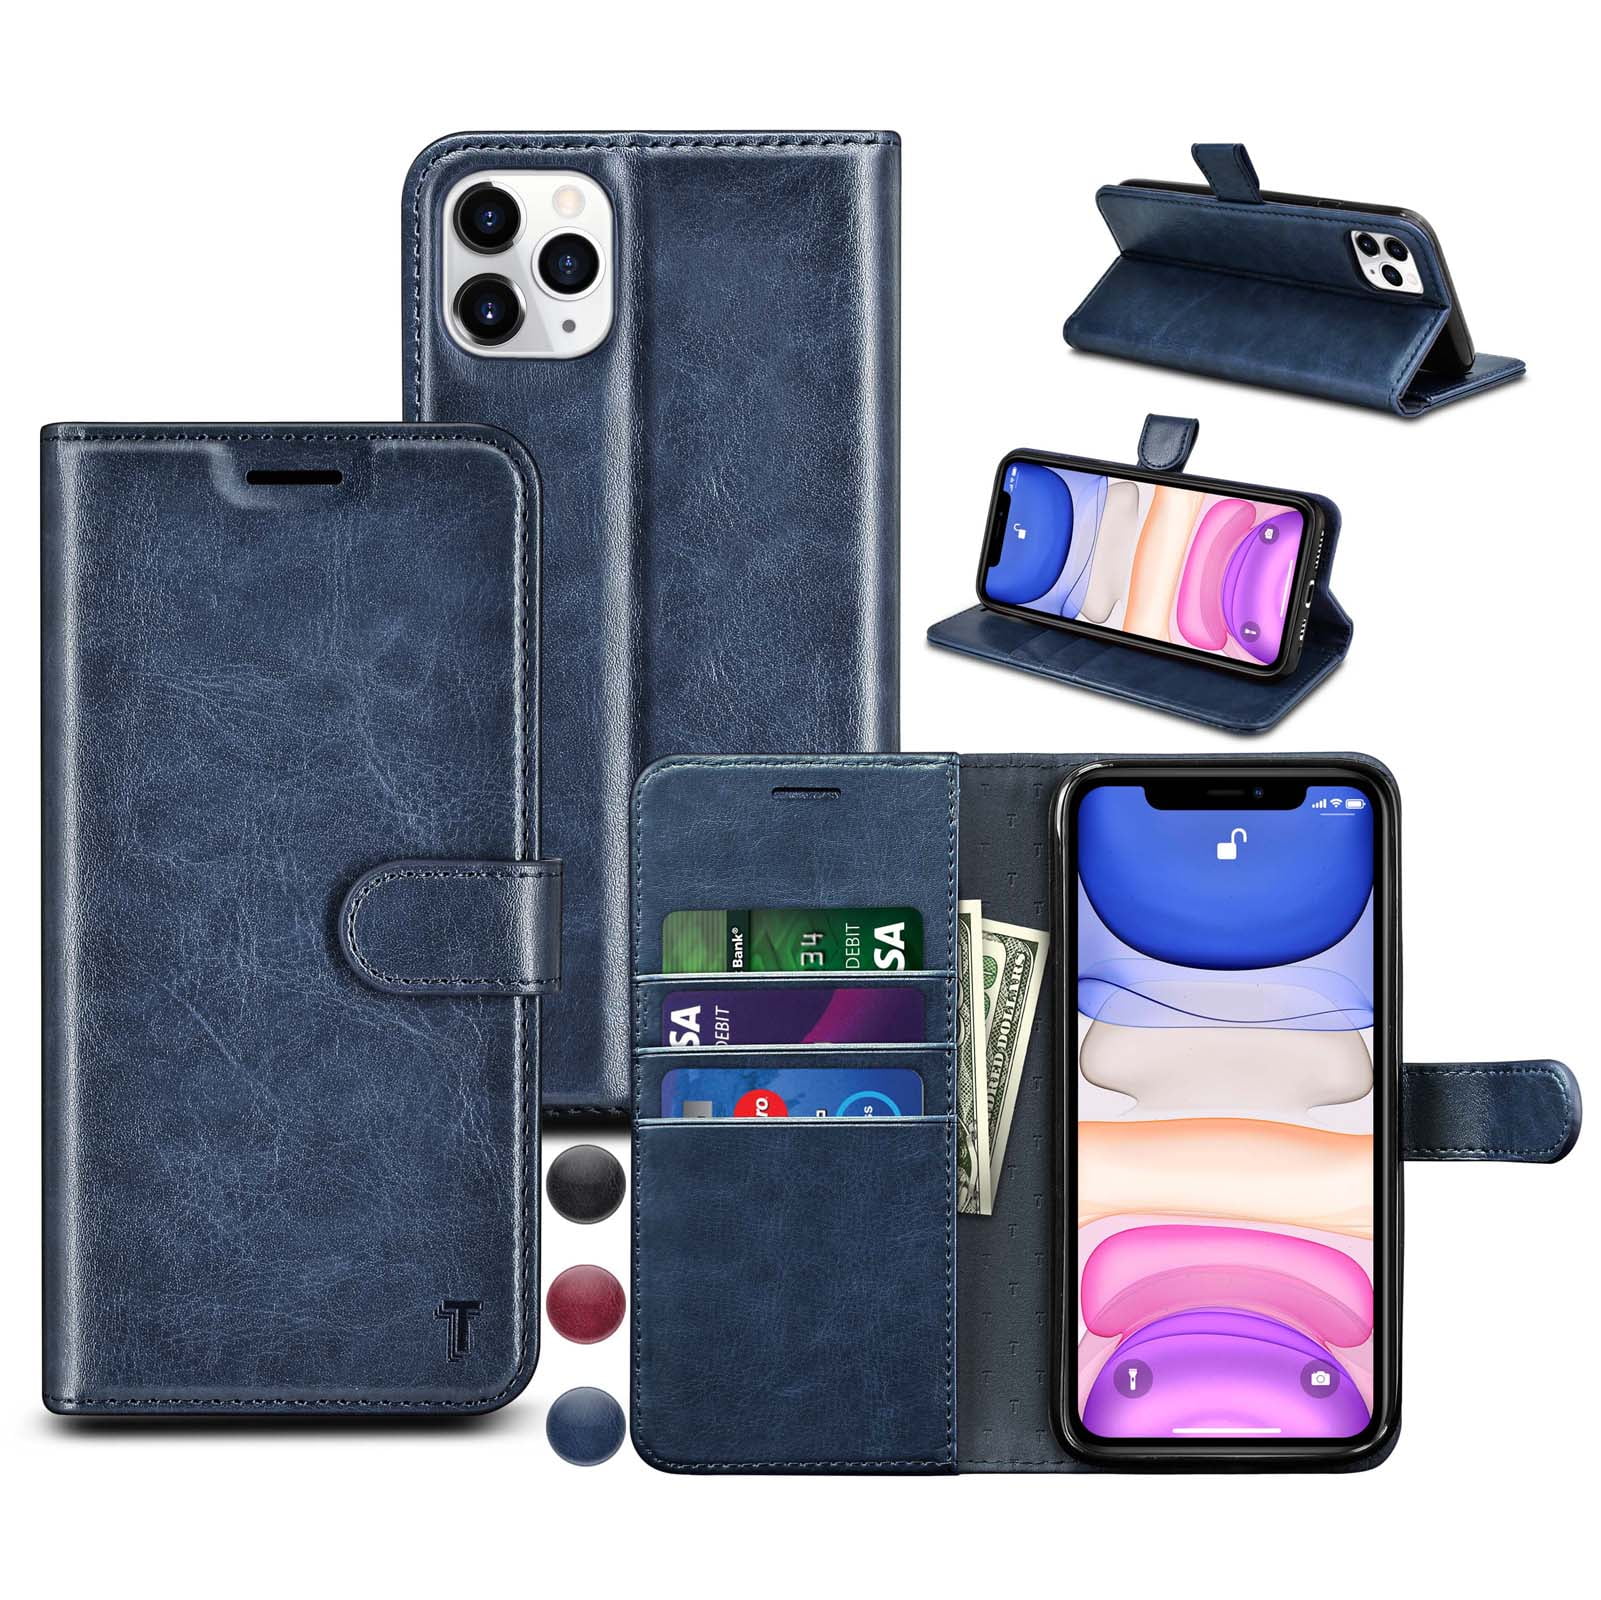 Njjex Case Wallet 2019 Iphone 11 Iphone 11 Pro Iphone 11 Pro Max